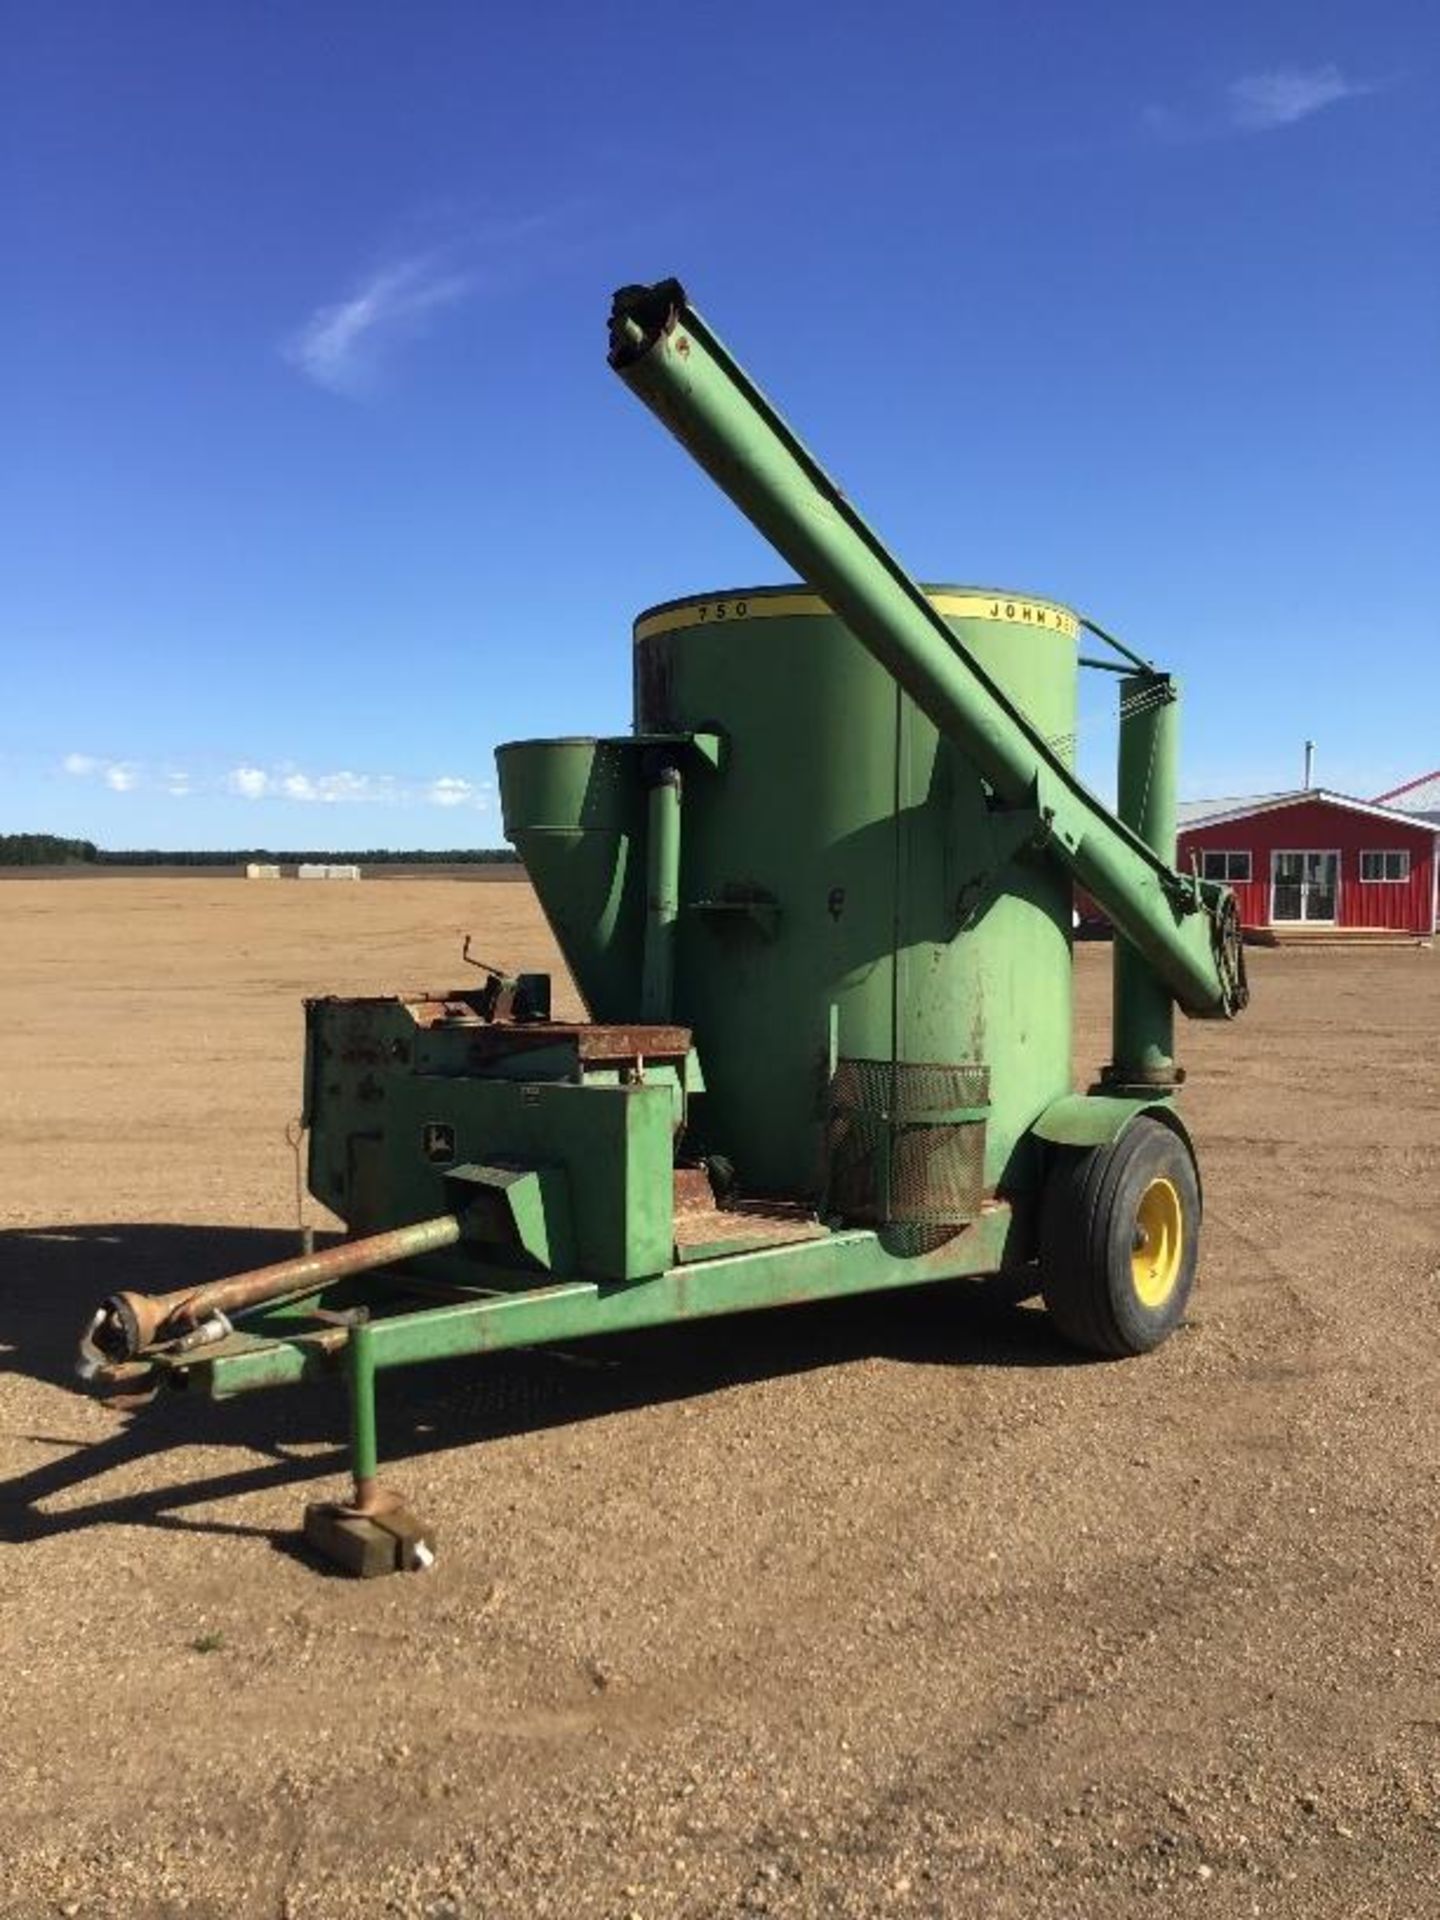 John Deere 750 Mix Mill Not been used in 4-5years, but was operational at the time.